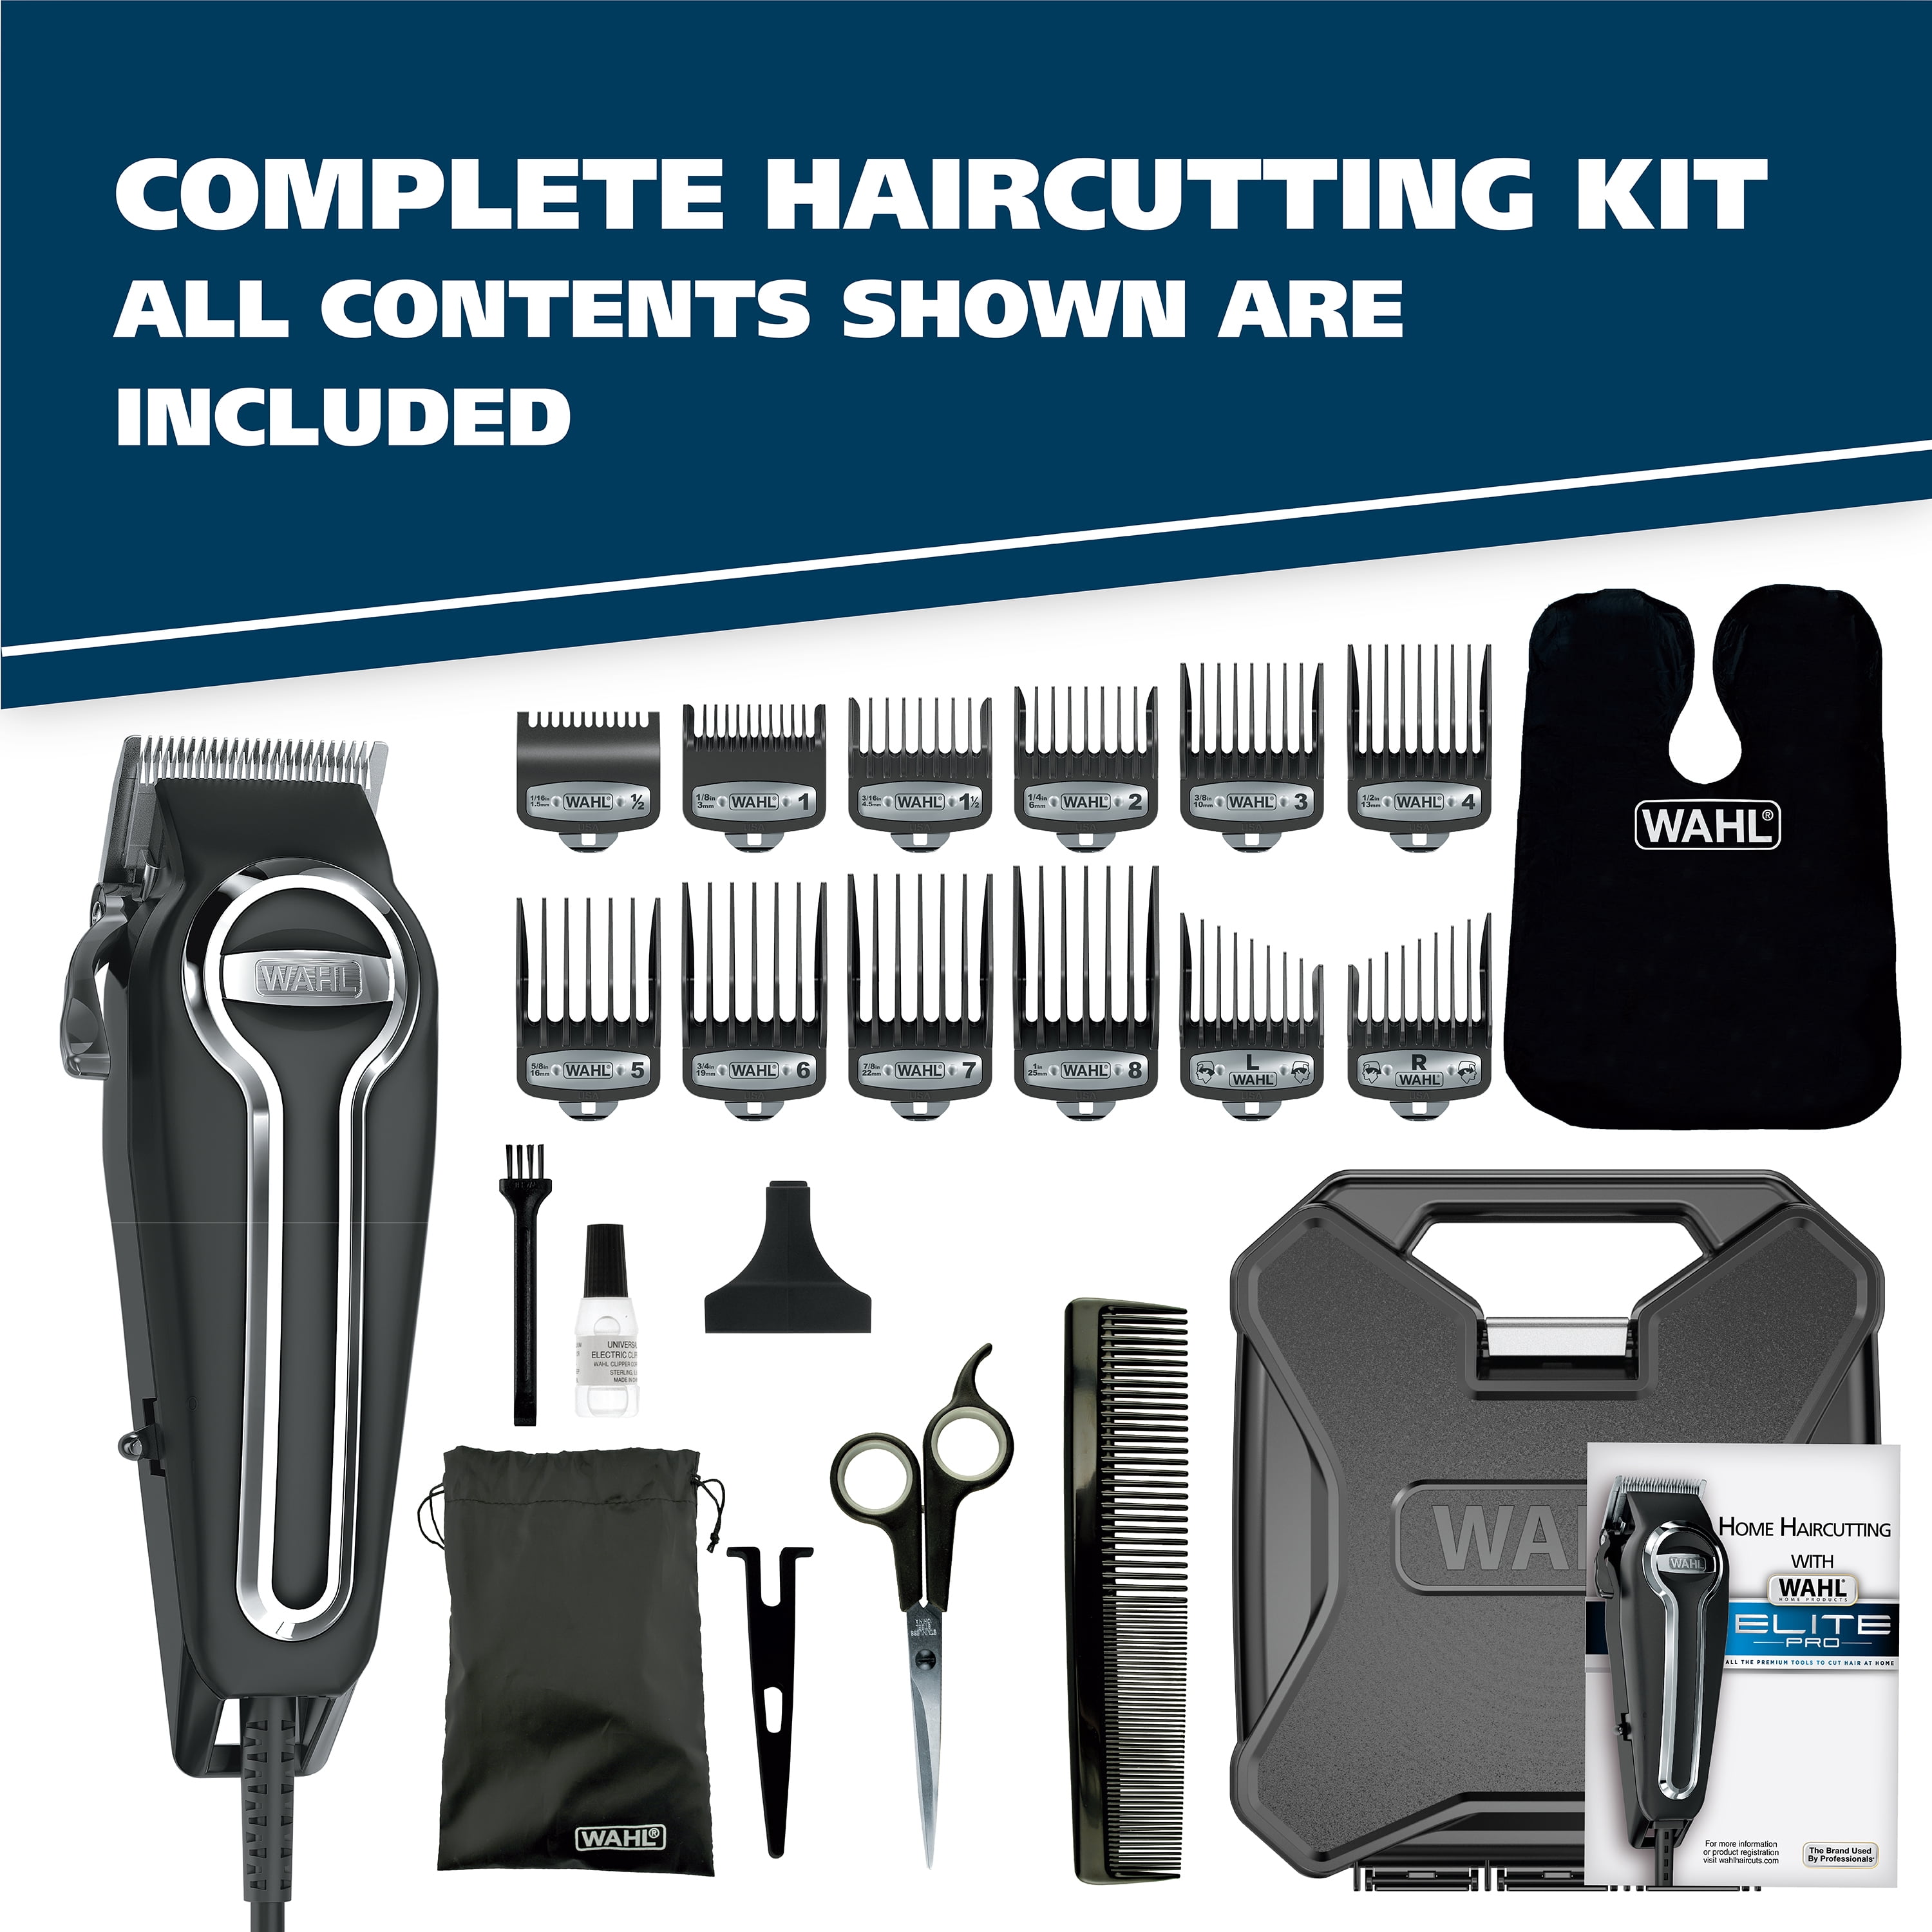 Wahl Elite Pro Complete High Performance Professional Men's Hair Cutting Kit,  21 Piece Set with Styling Shear, Comb  Clippers, 79602